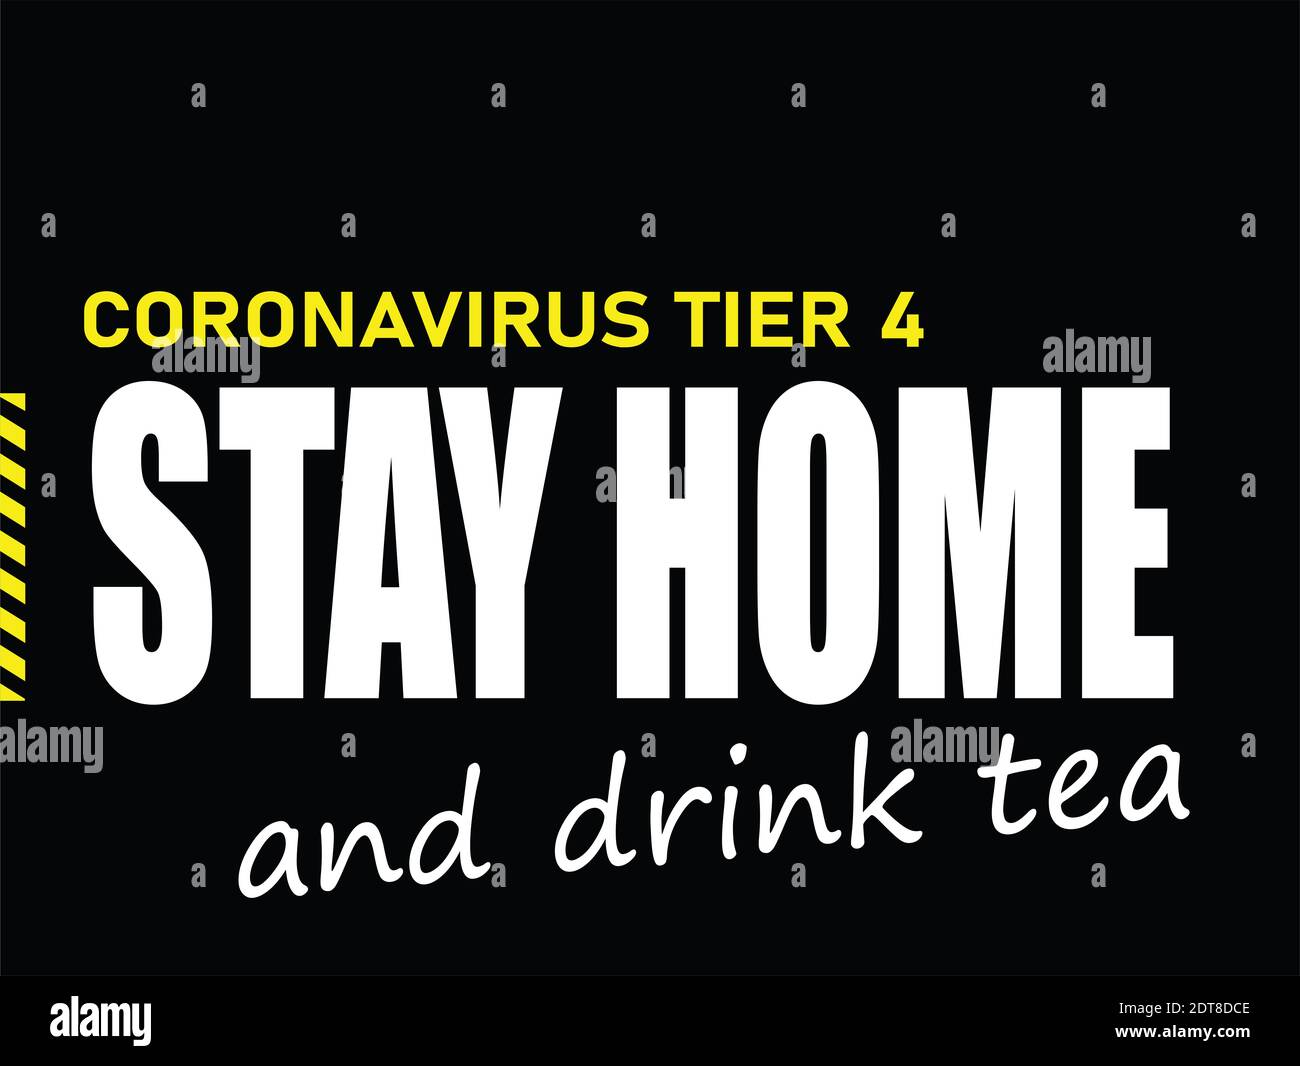 CORONAVIRUS TIER 4 STAY HOME. Poster on a black background. Used in the United Kingdom to alert the public about the higest lockdown level. Illustrati Stock Photo